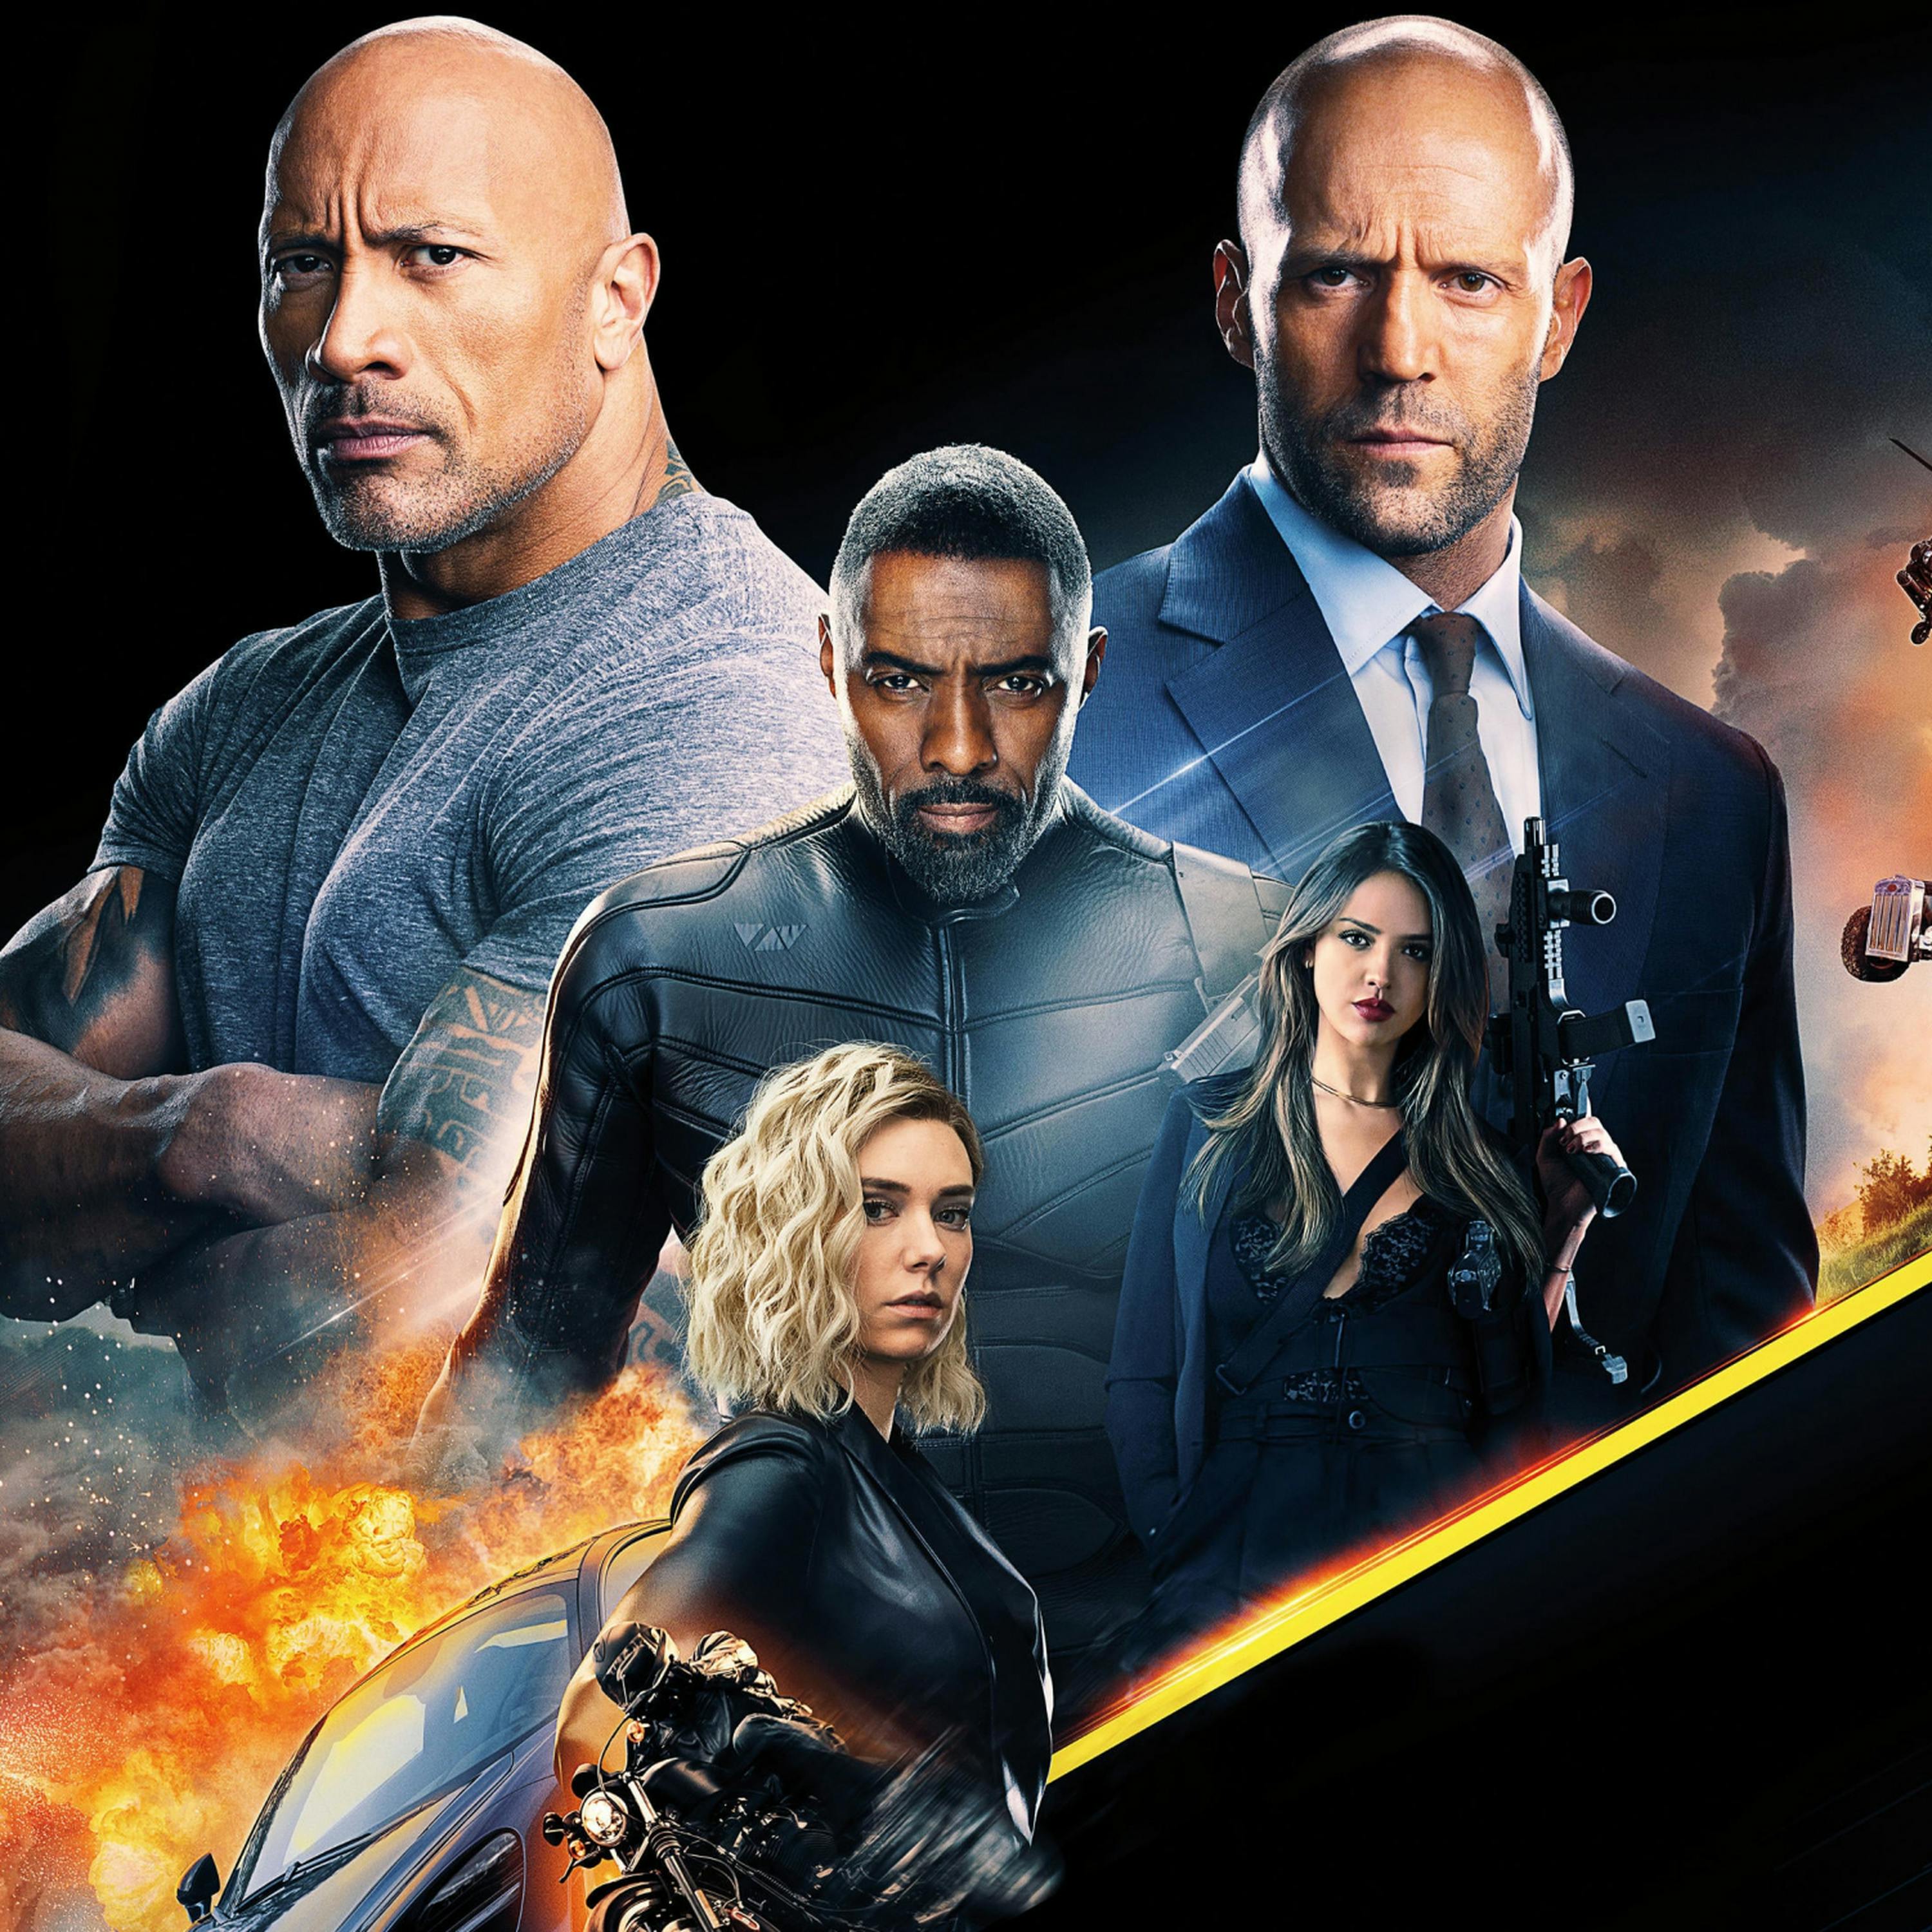 Episode 166 - Fast & Furious Presents: Hobbs & Shaw